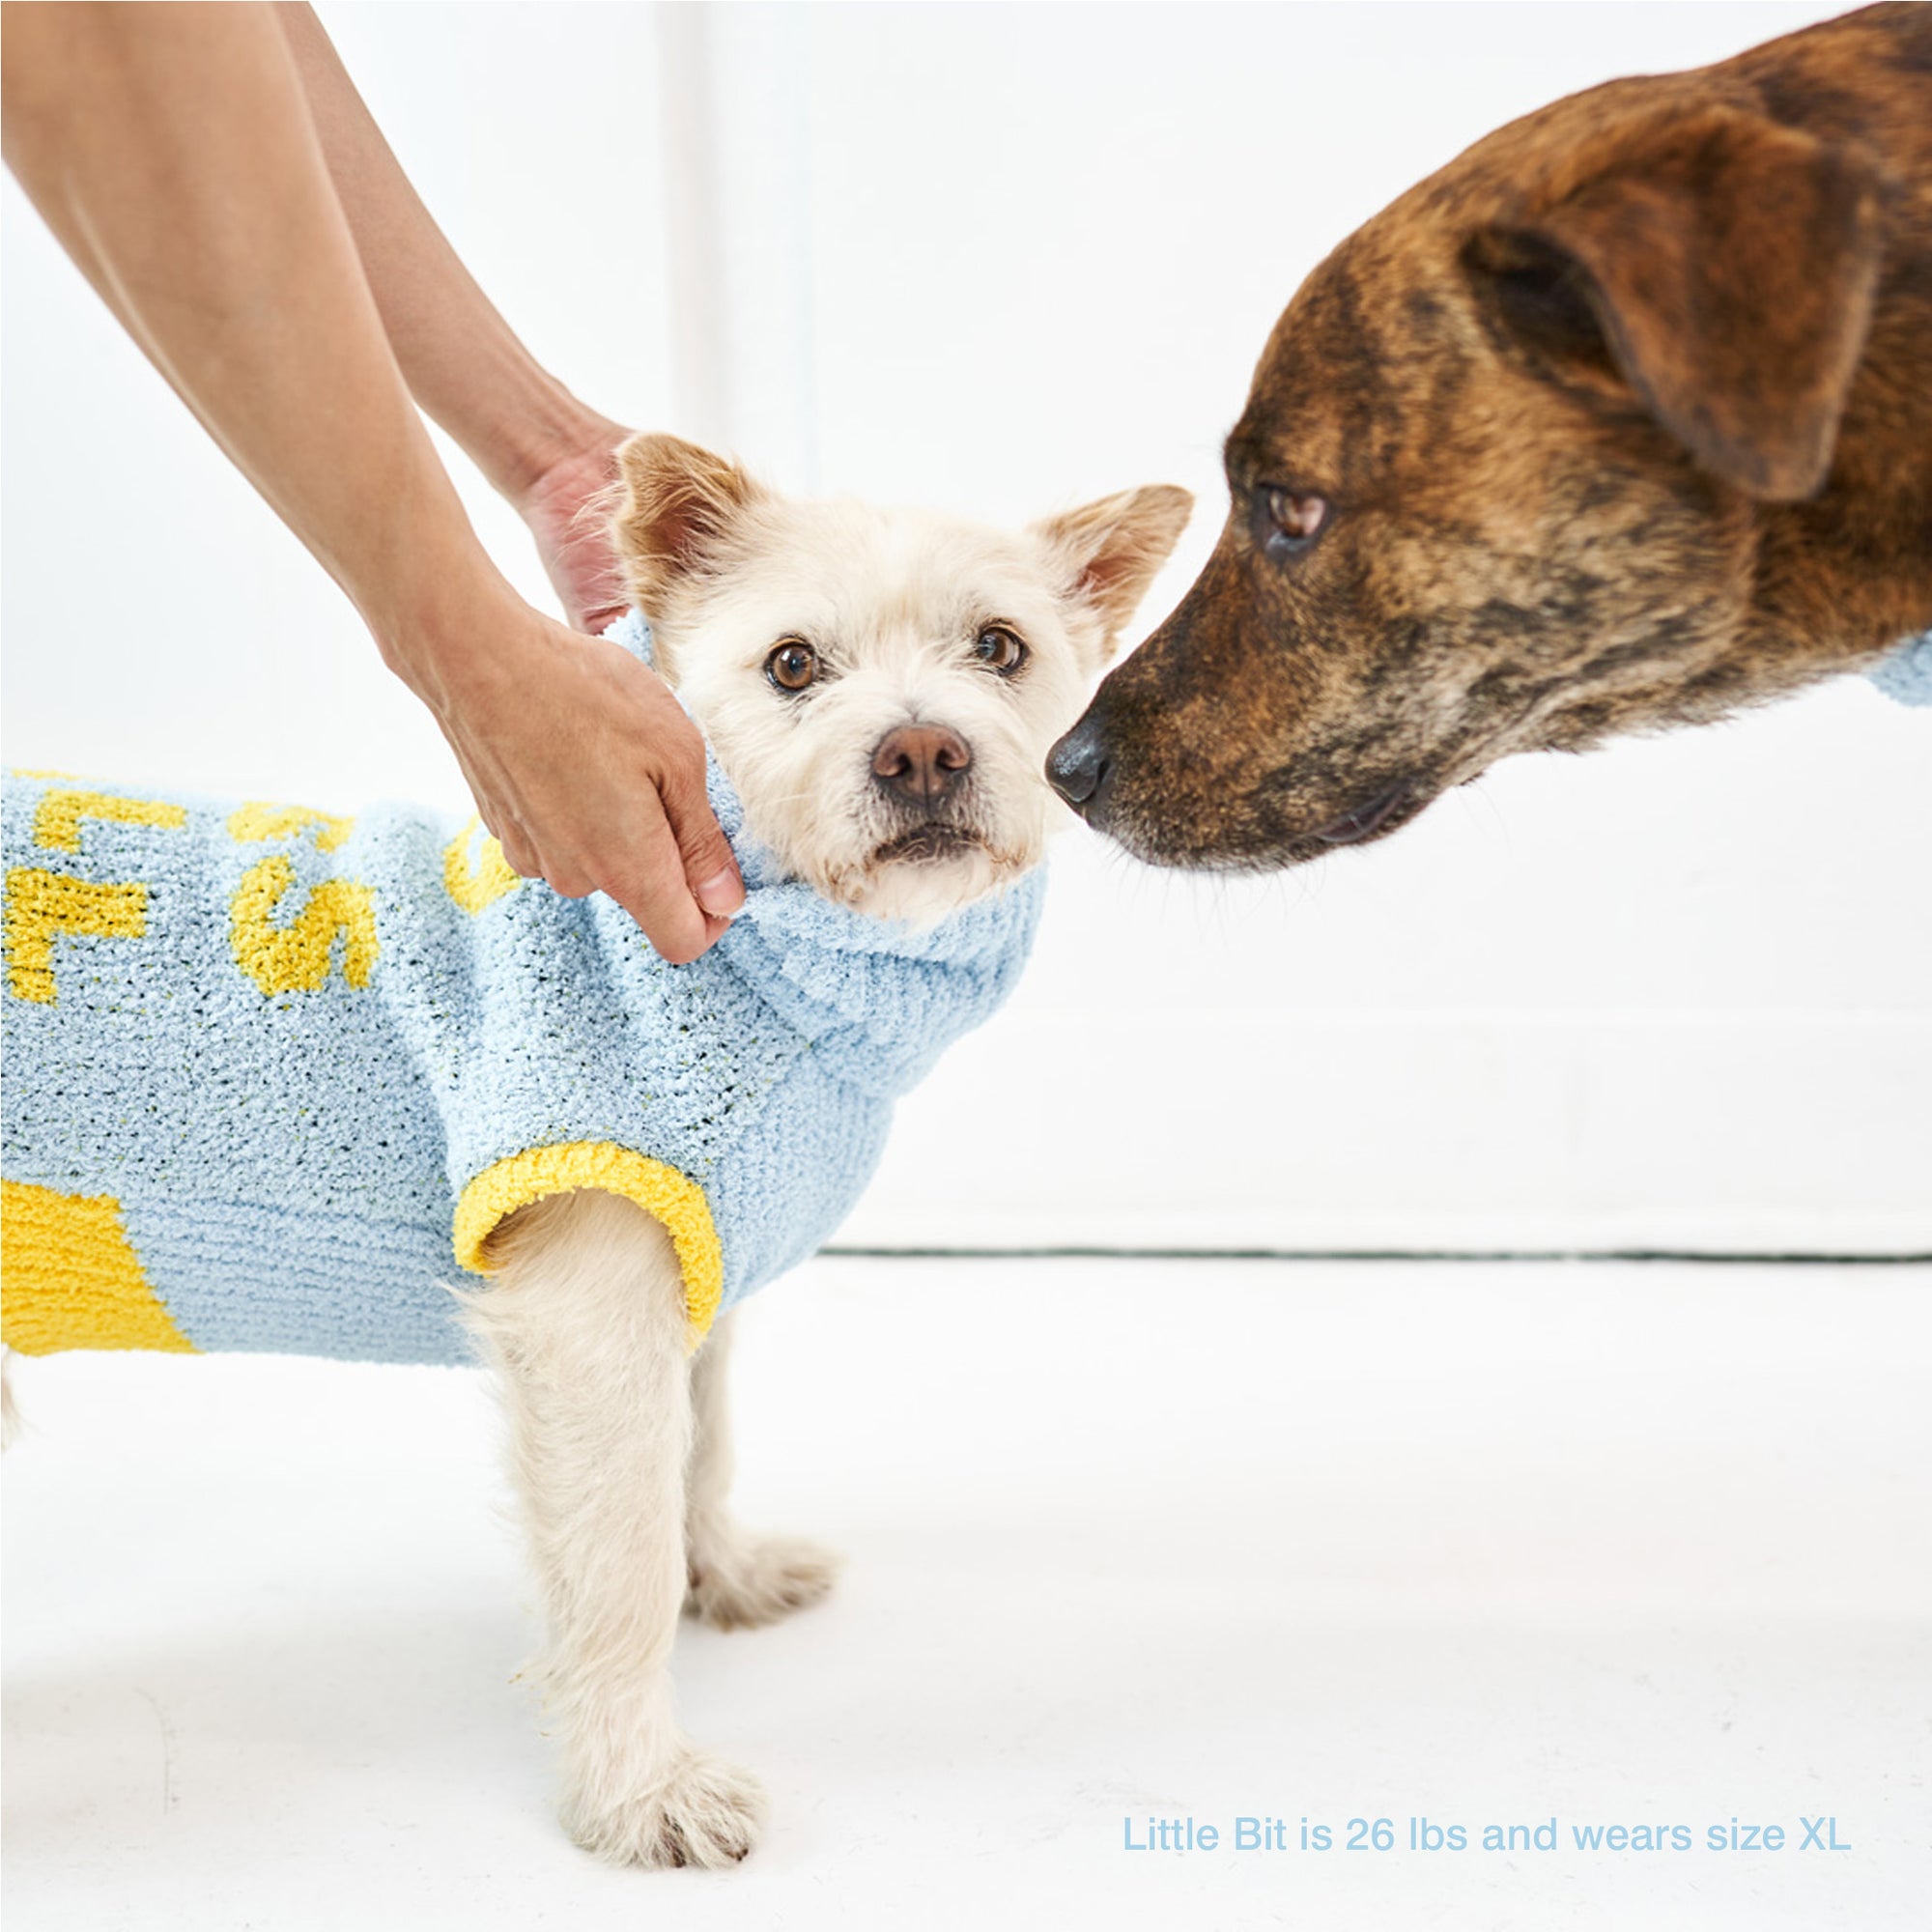 Dog named Little Bit, 26 lbs, in an XL "The Furryfolks" sweater, meets another dog's nose, human hand on back.